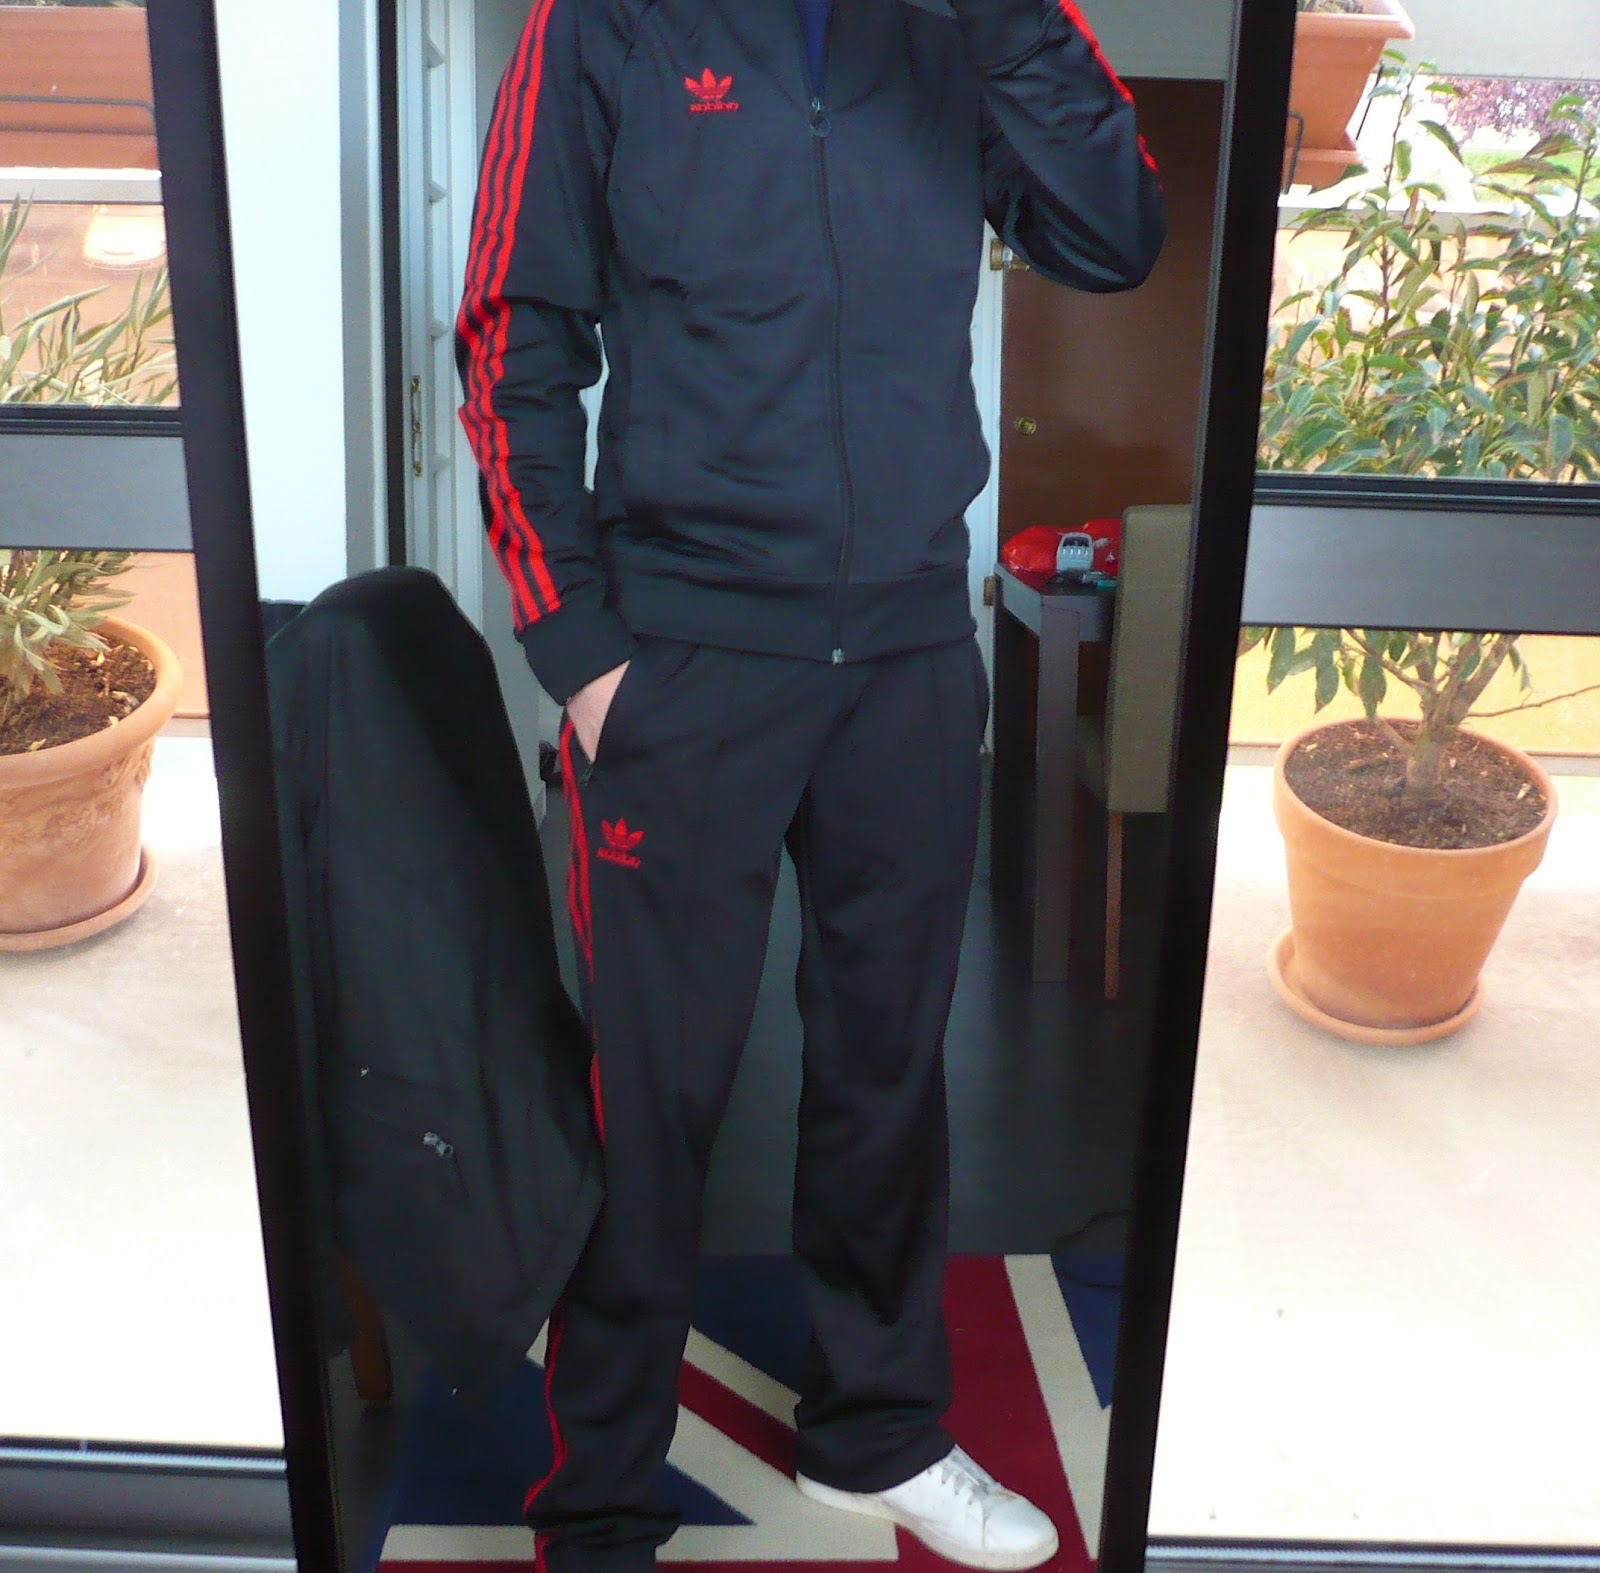 The3StripesBlog: My new black and red adidas Superstar track suit